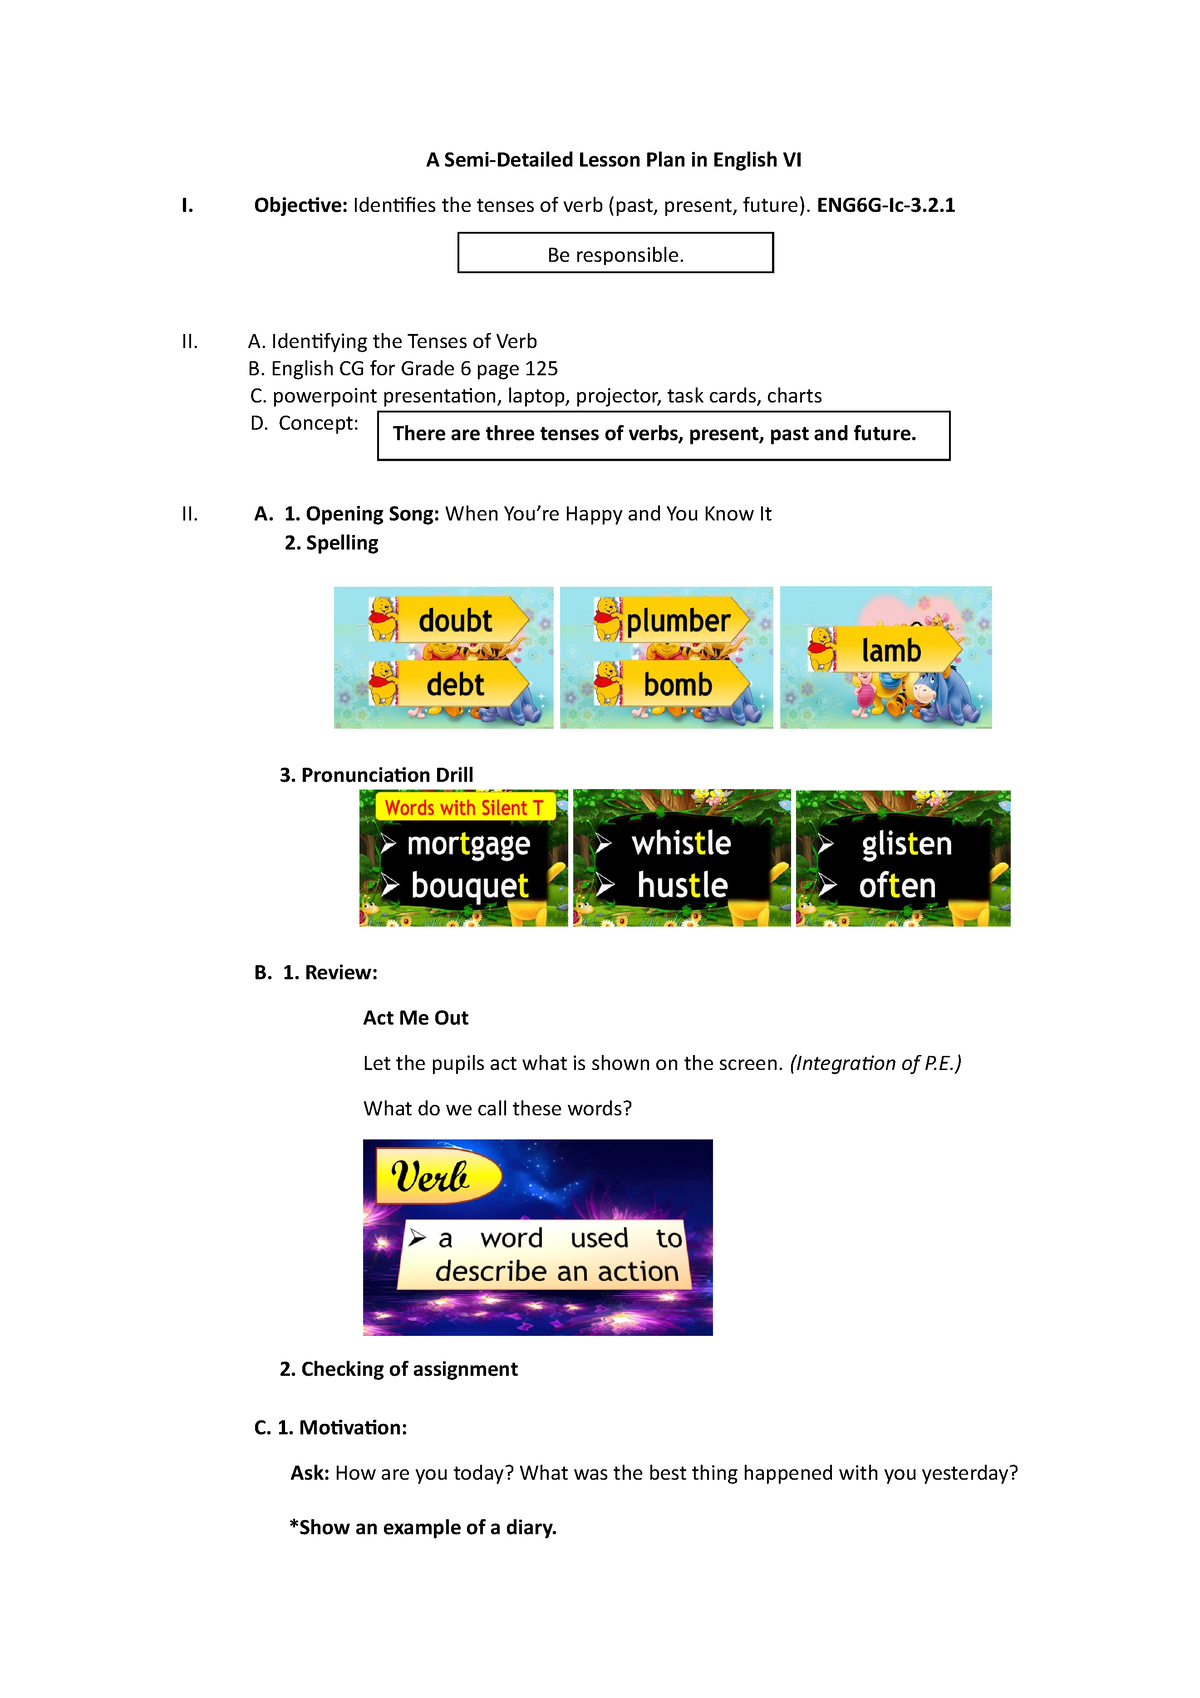 tenses-of-verb-lesson-plan-a-semi-detailed-lesson-plan-in-english